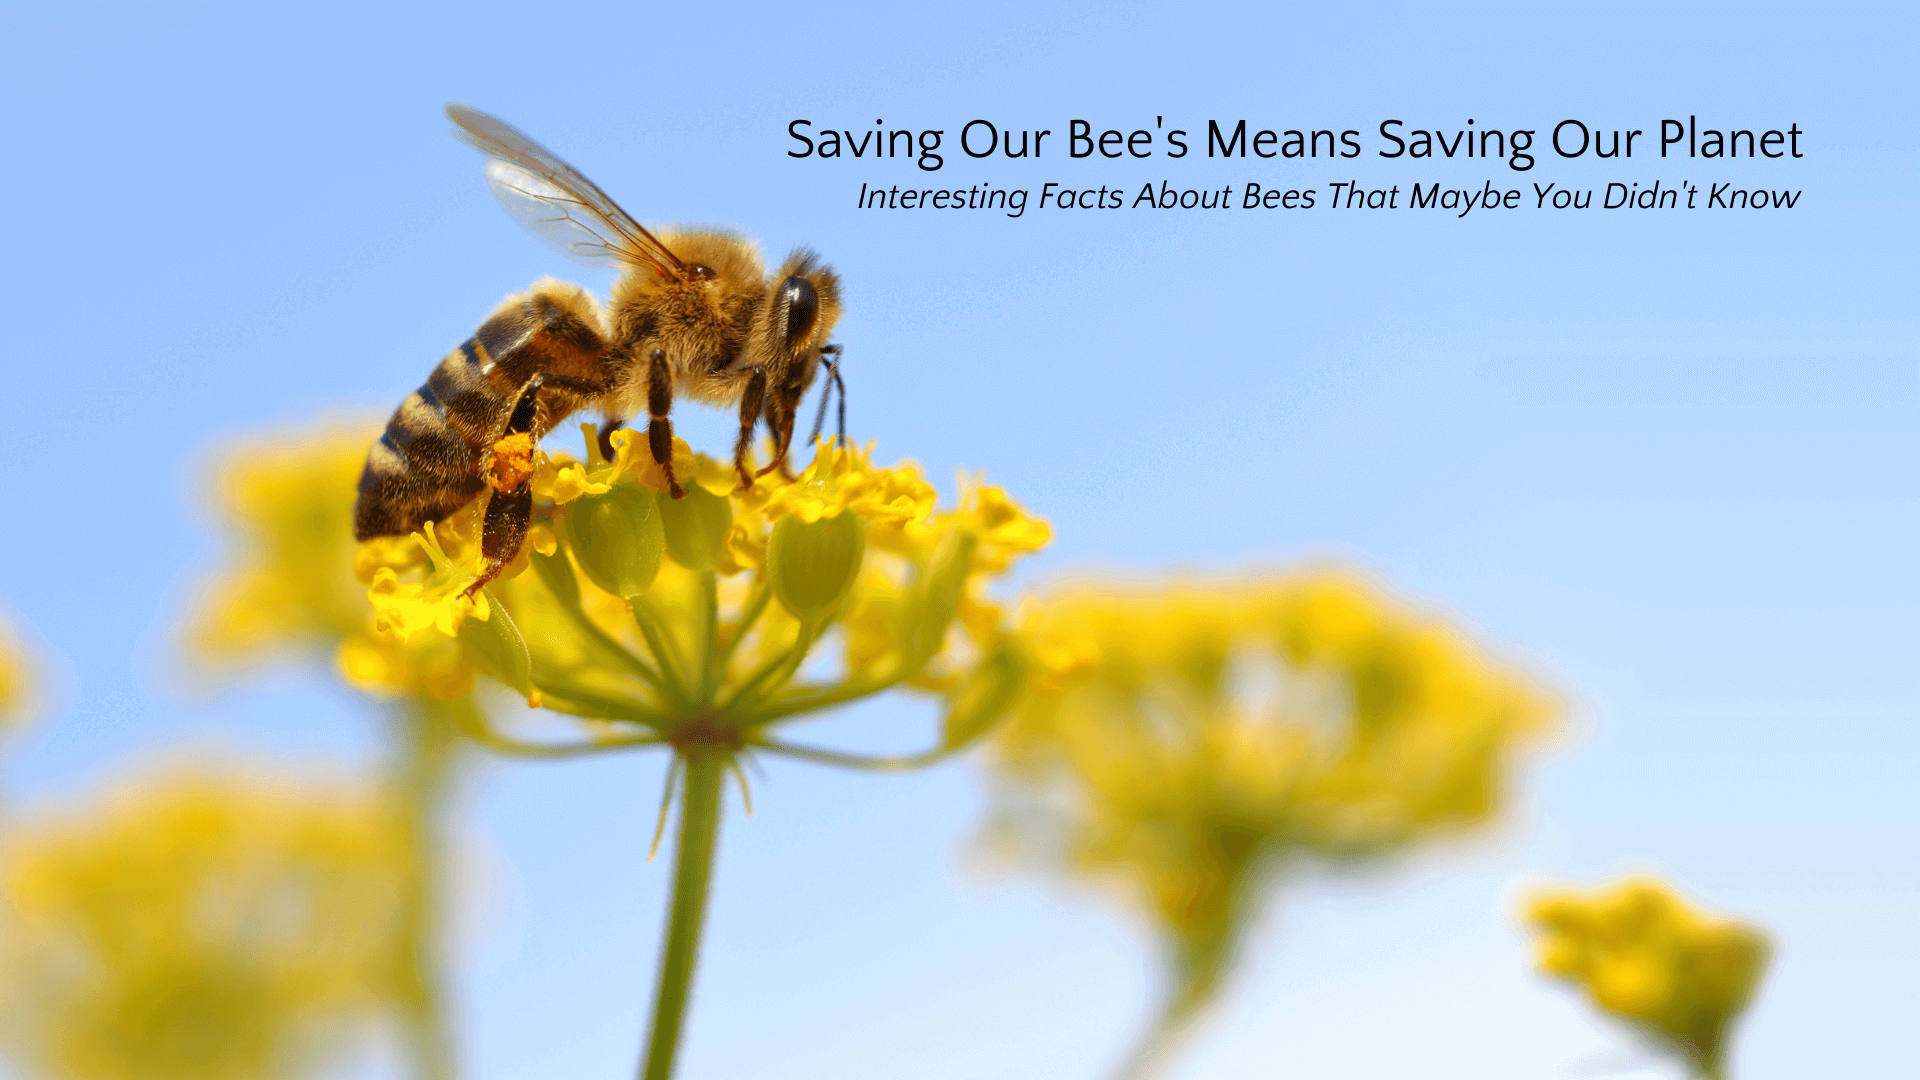 Load video: Video highlighting how we can help to save our honey bees.